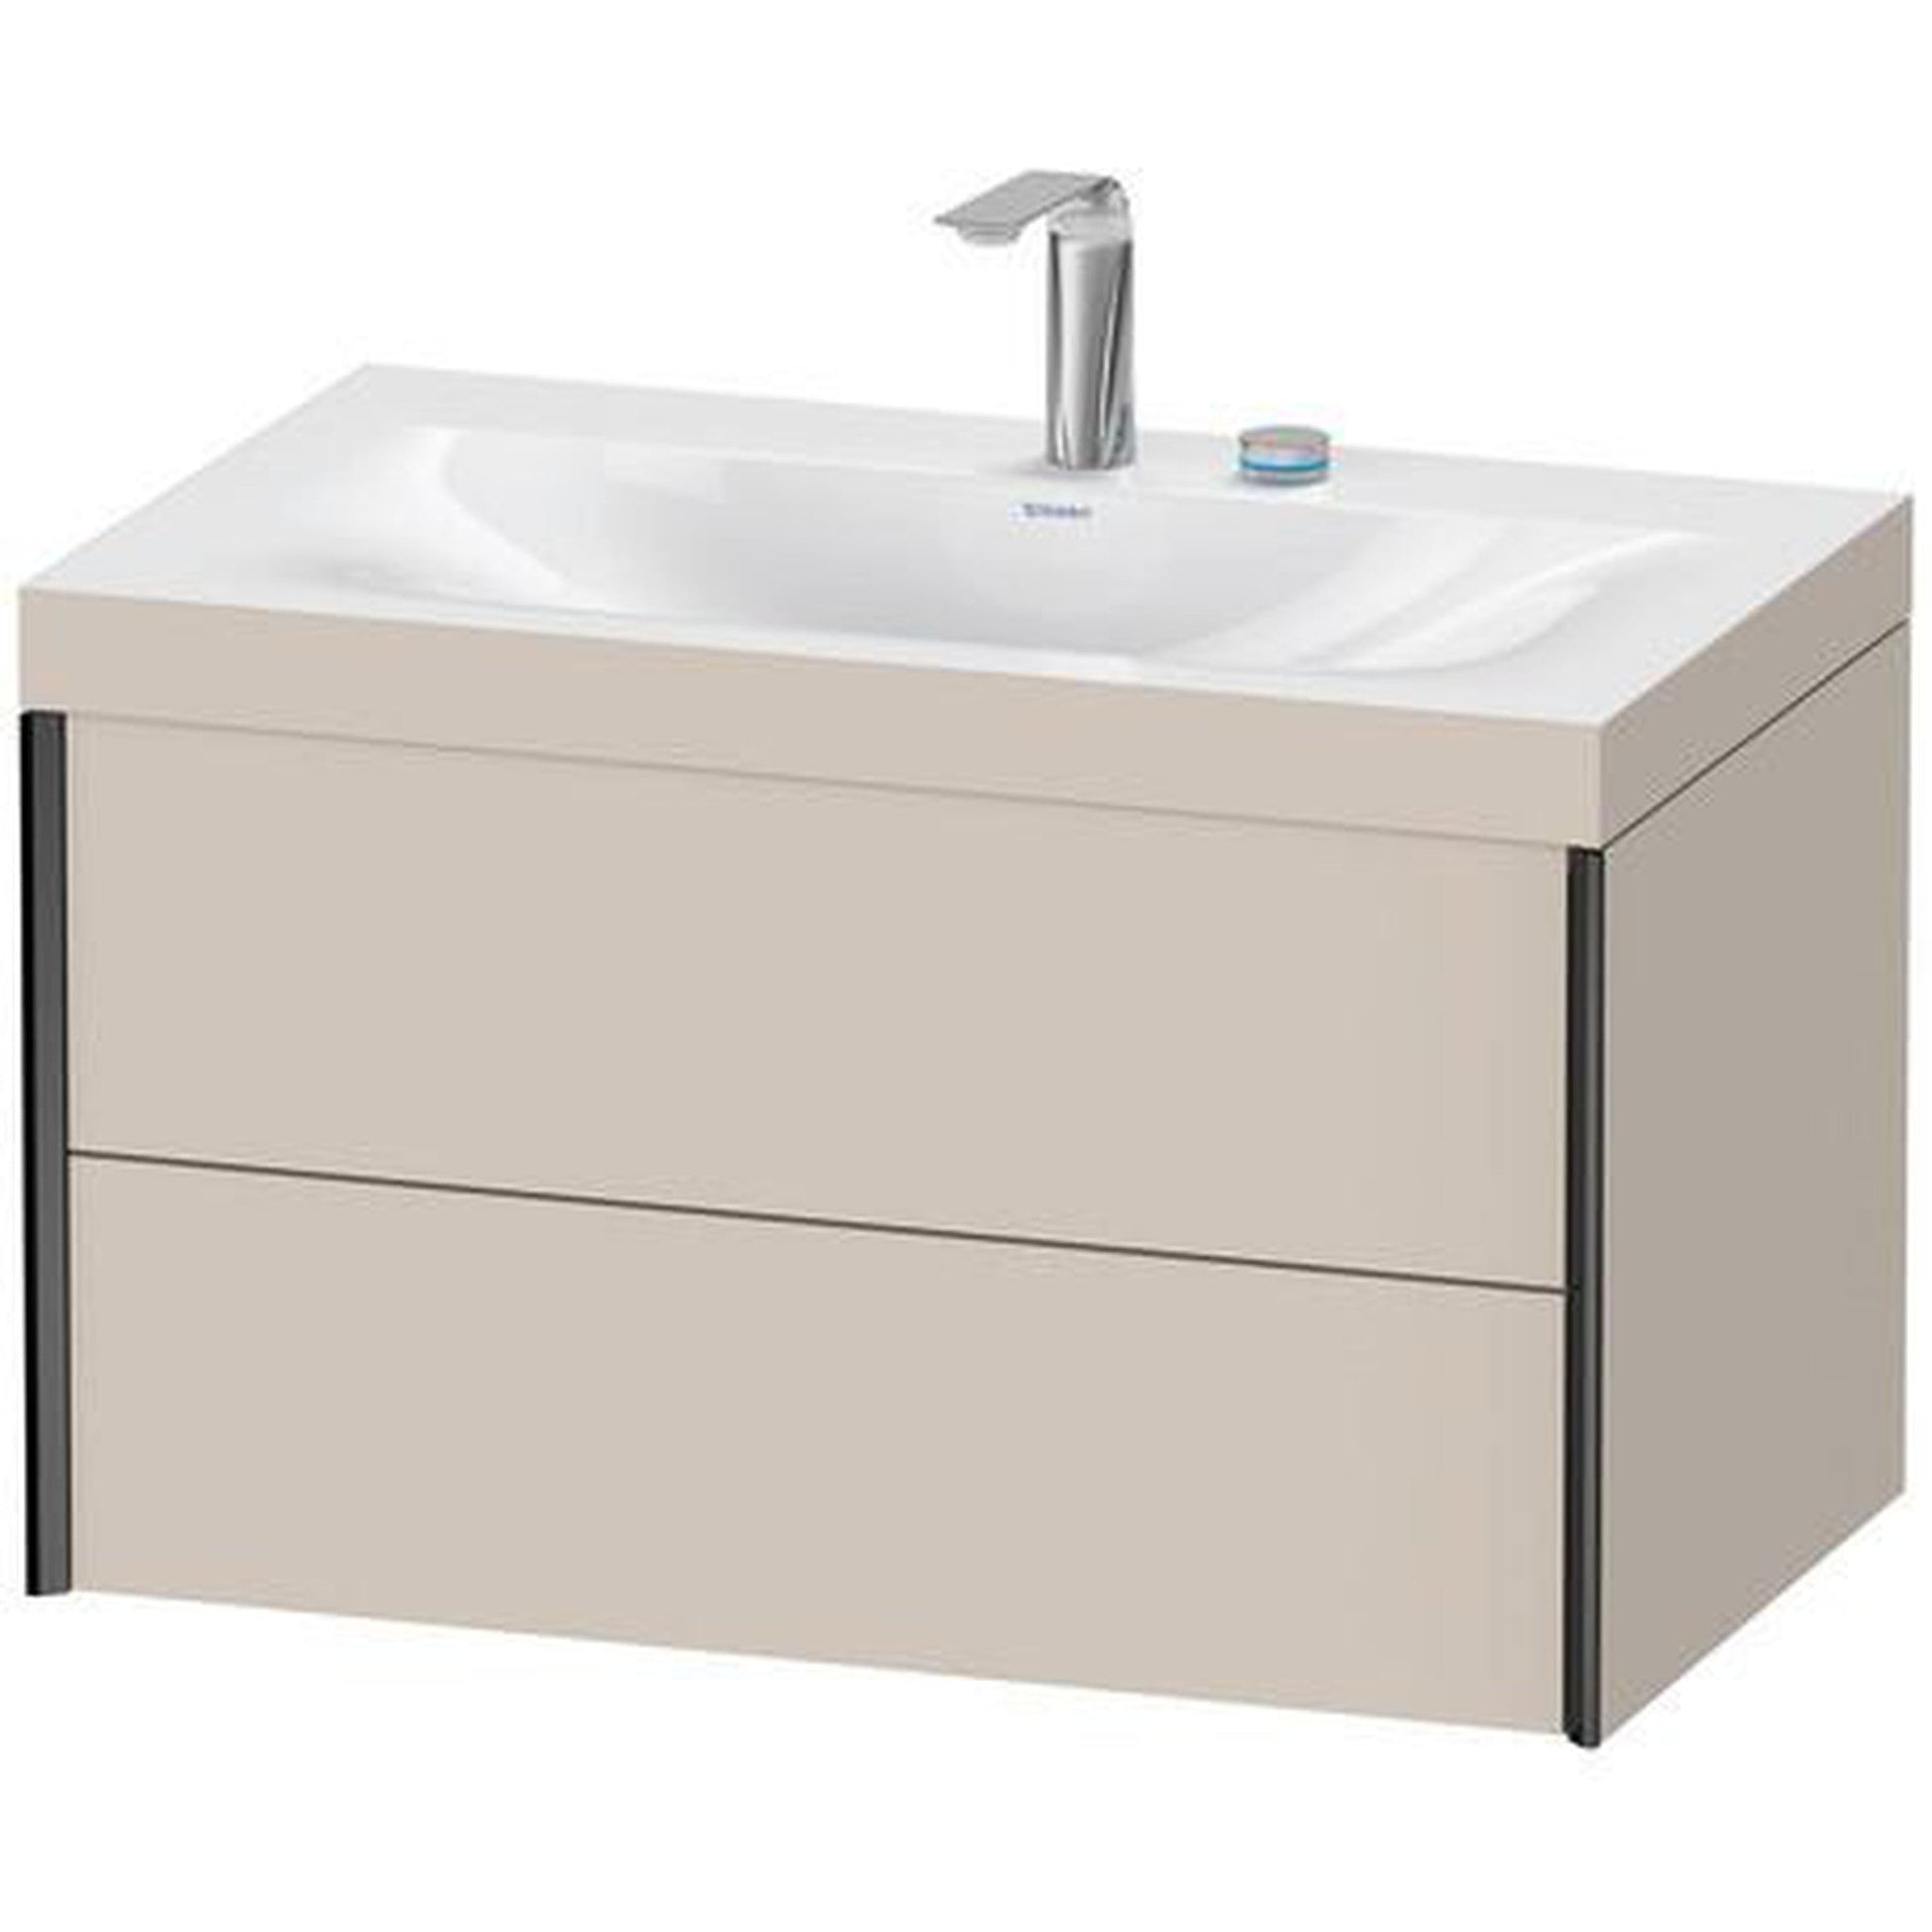 Duravit Xviu 31" x 20" x 19" Two Drawer C-Bonded Wall-Mount Vanity Kit With Two Tap Holes, Taupe (XV4615EB291C)